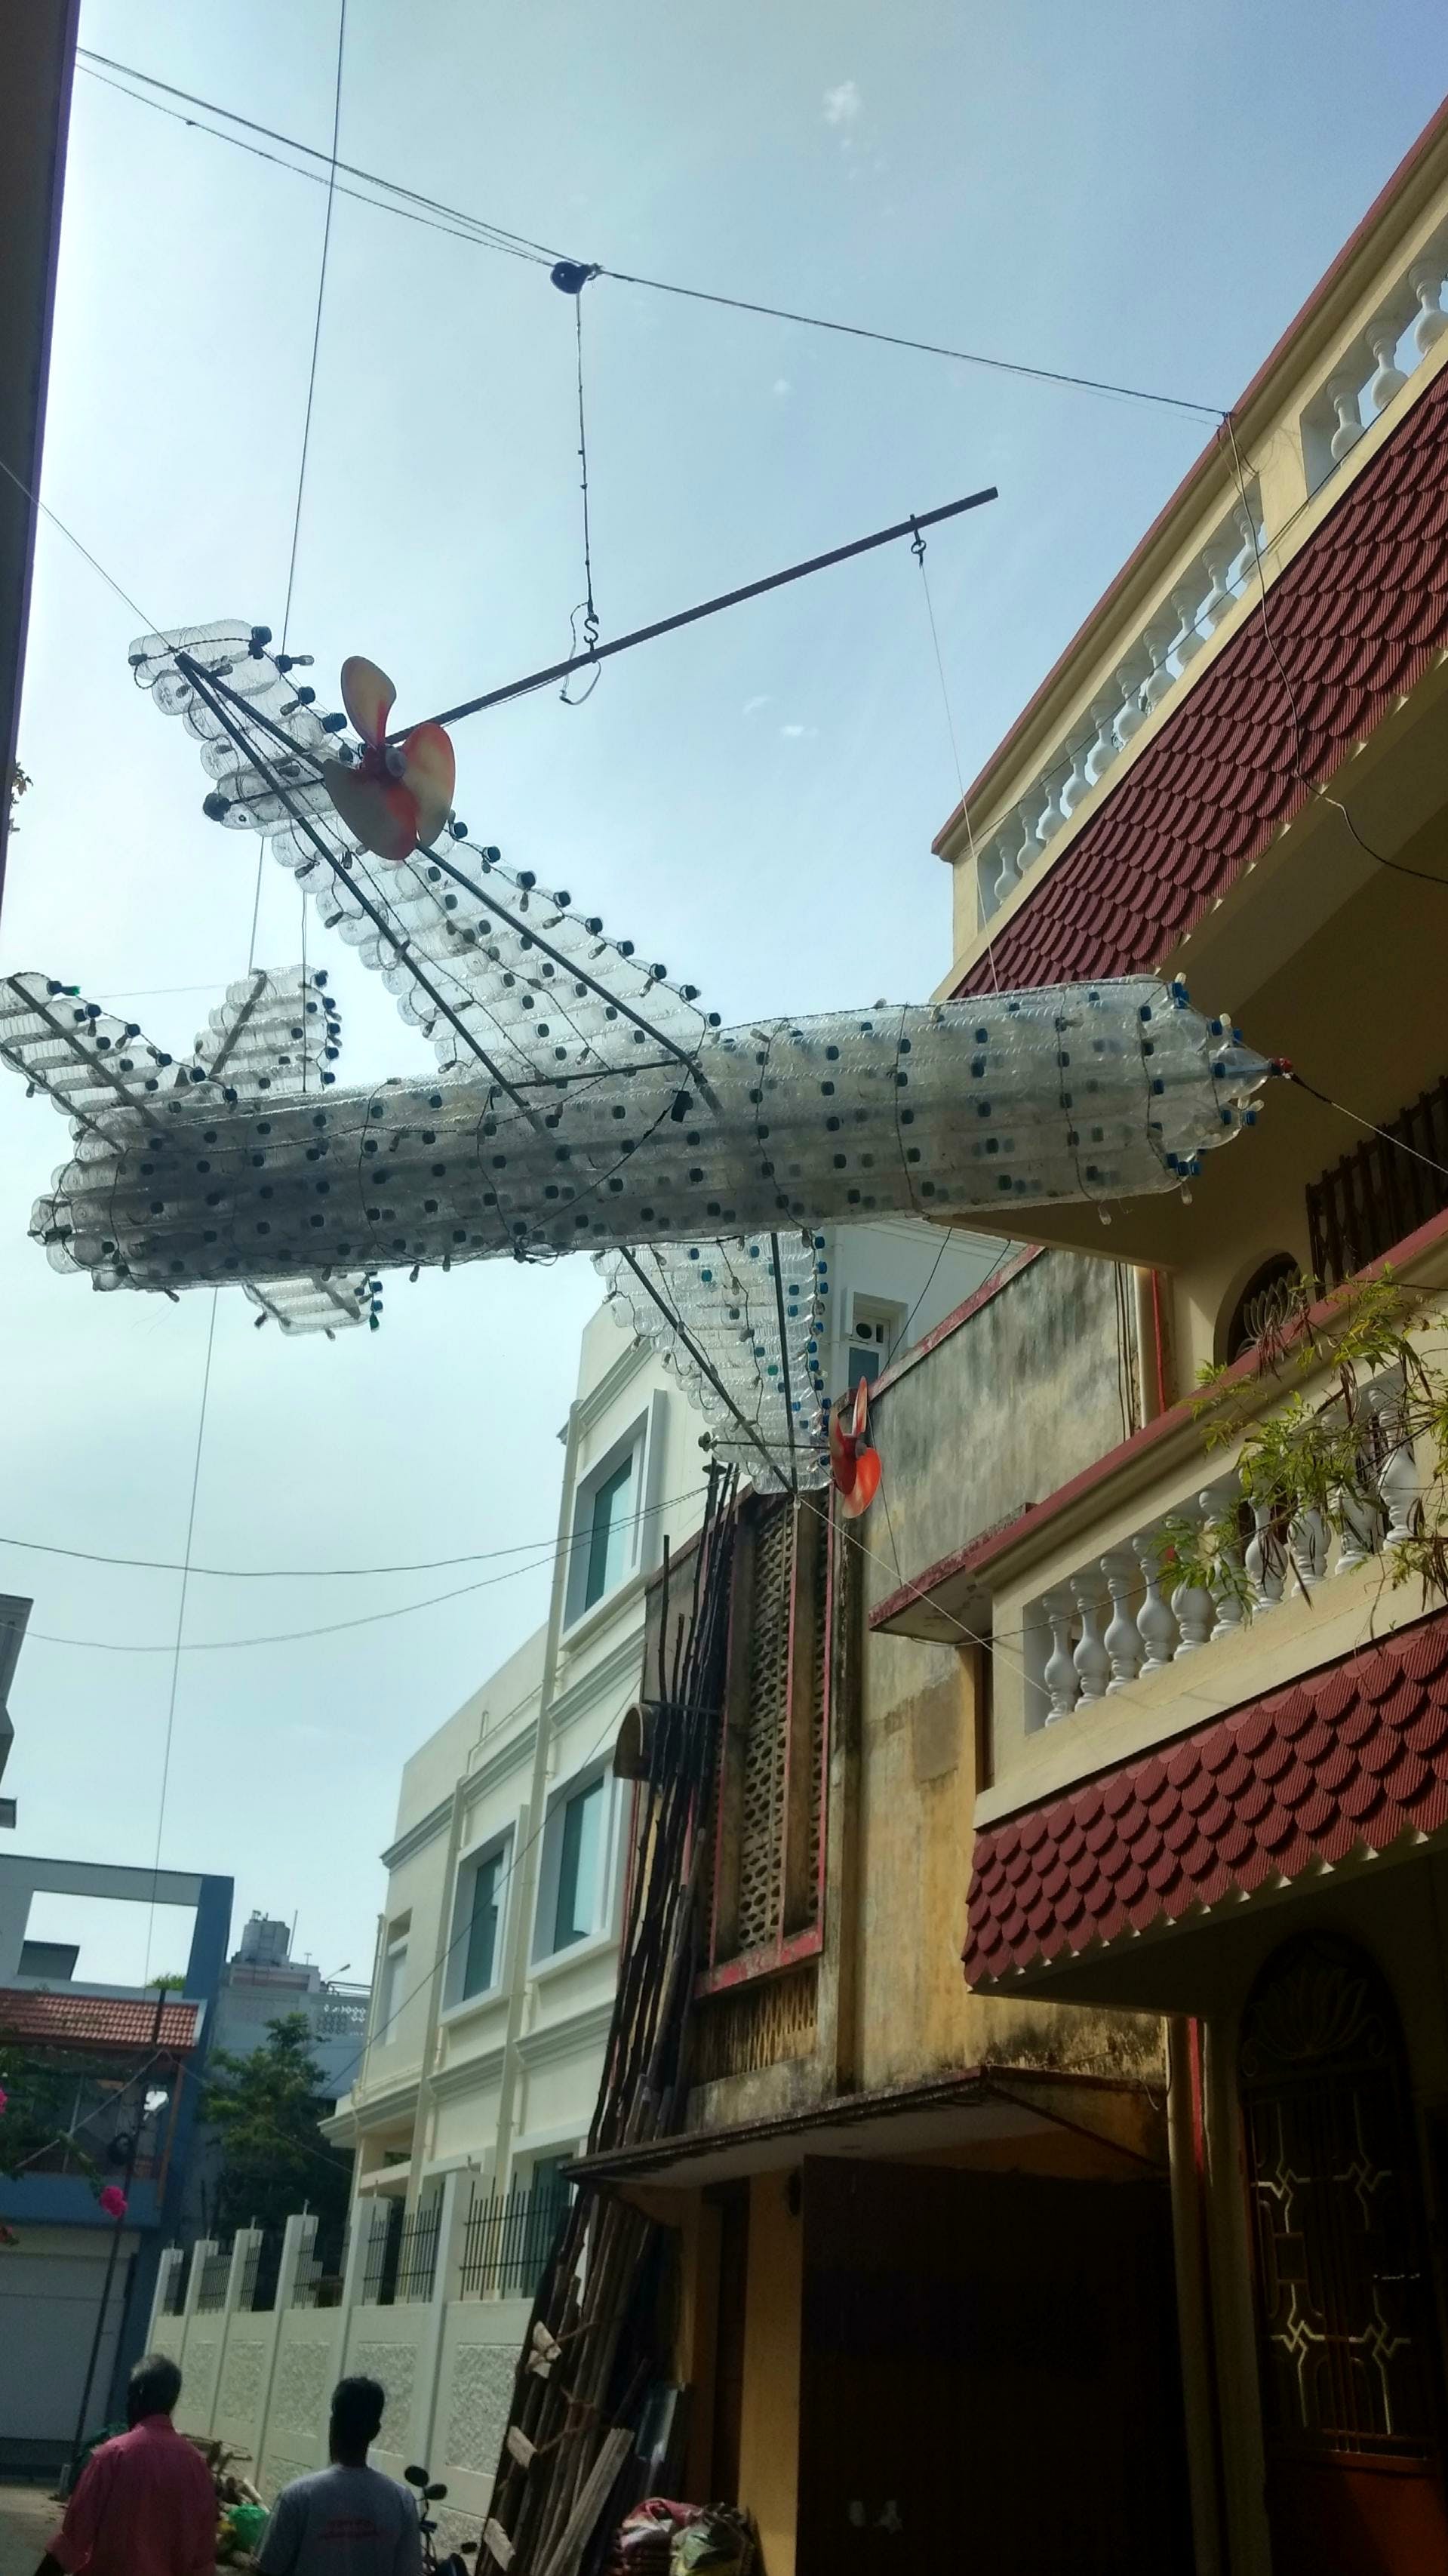 Mr. Mosel's Plastic Sculptors In The Lanes Of Pondy! #LBBChennai